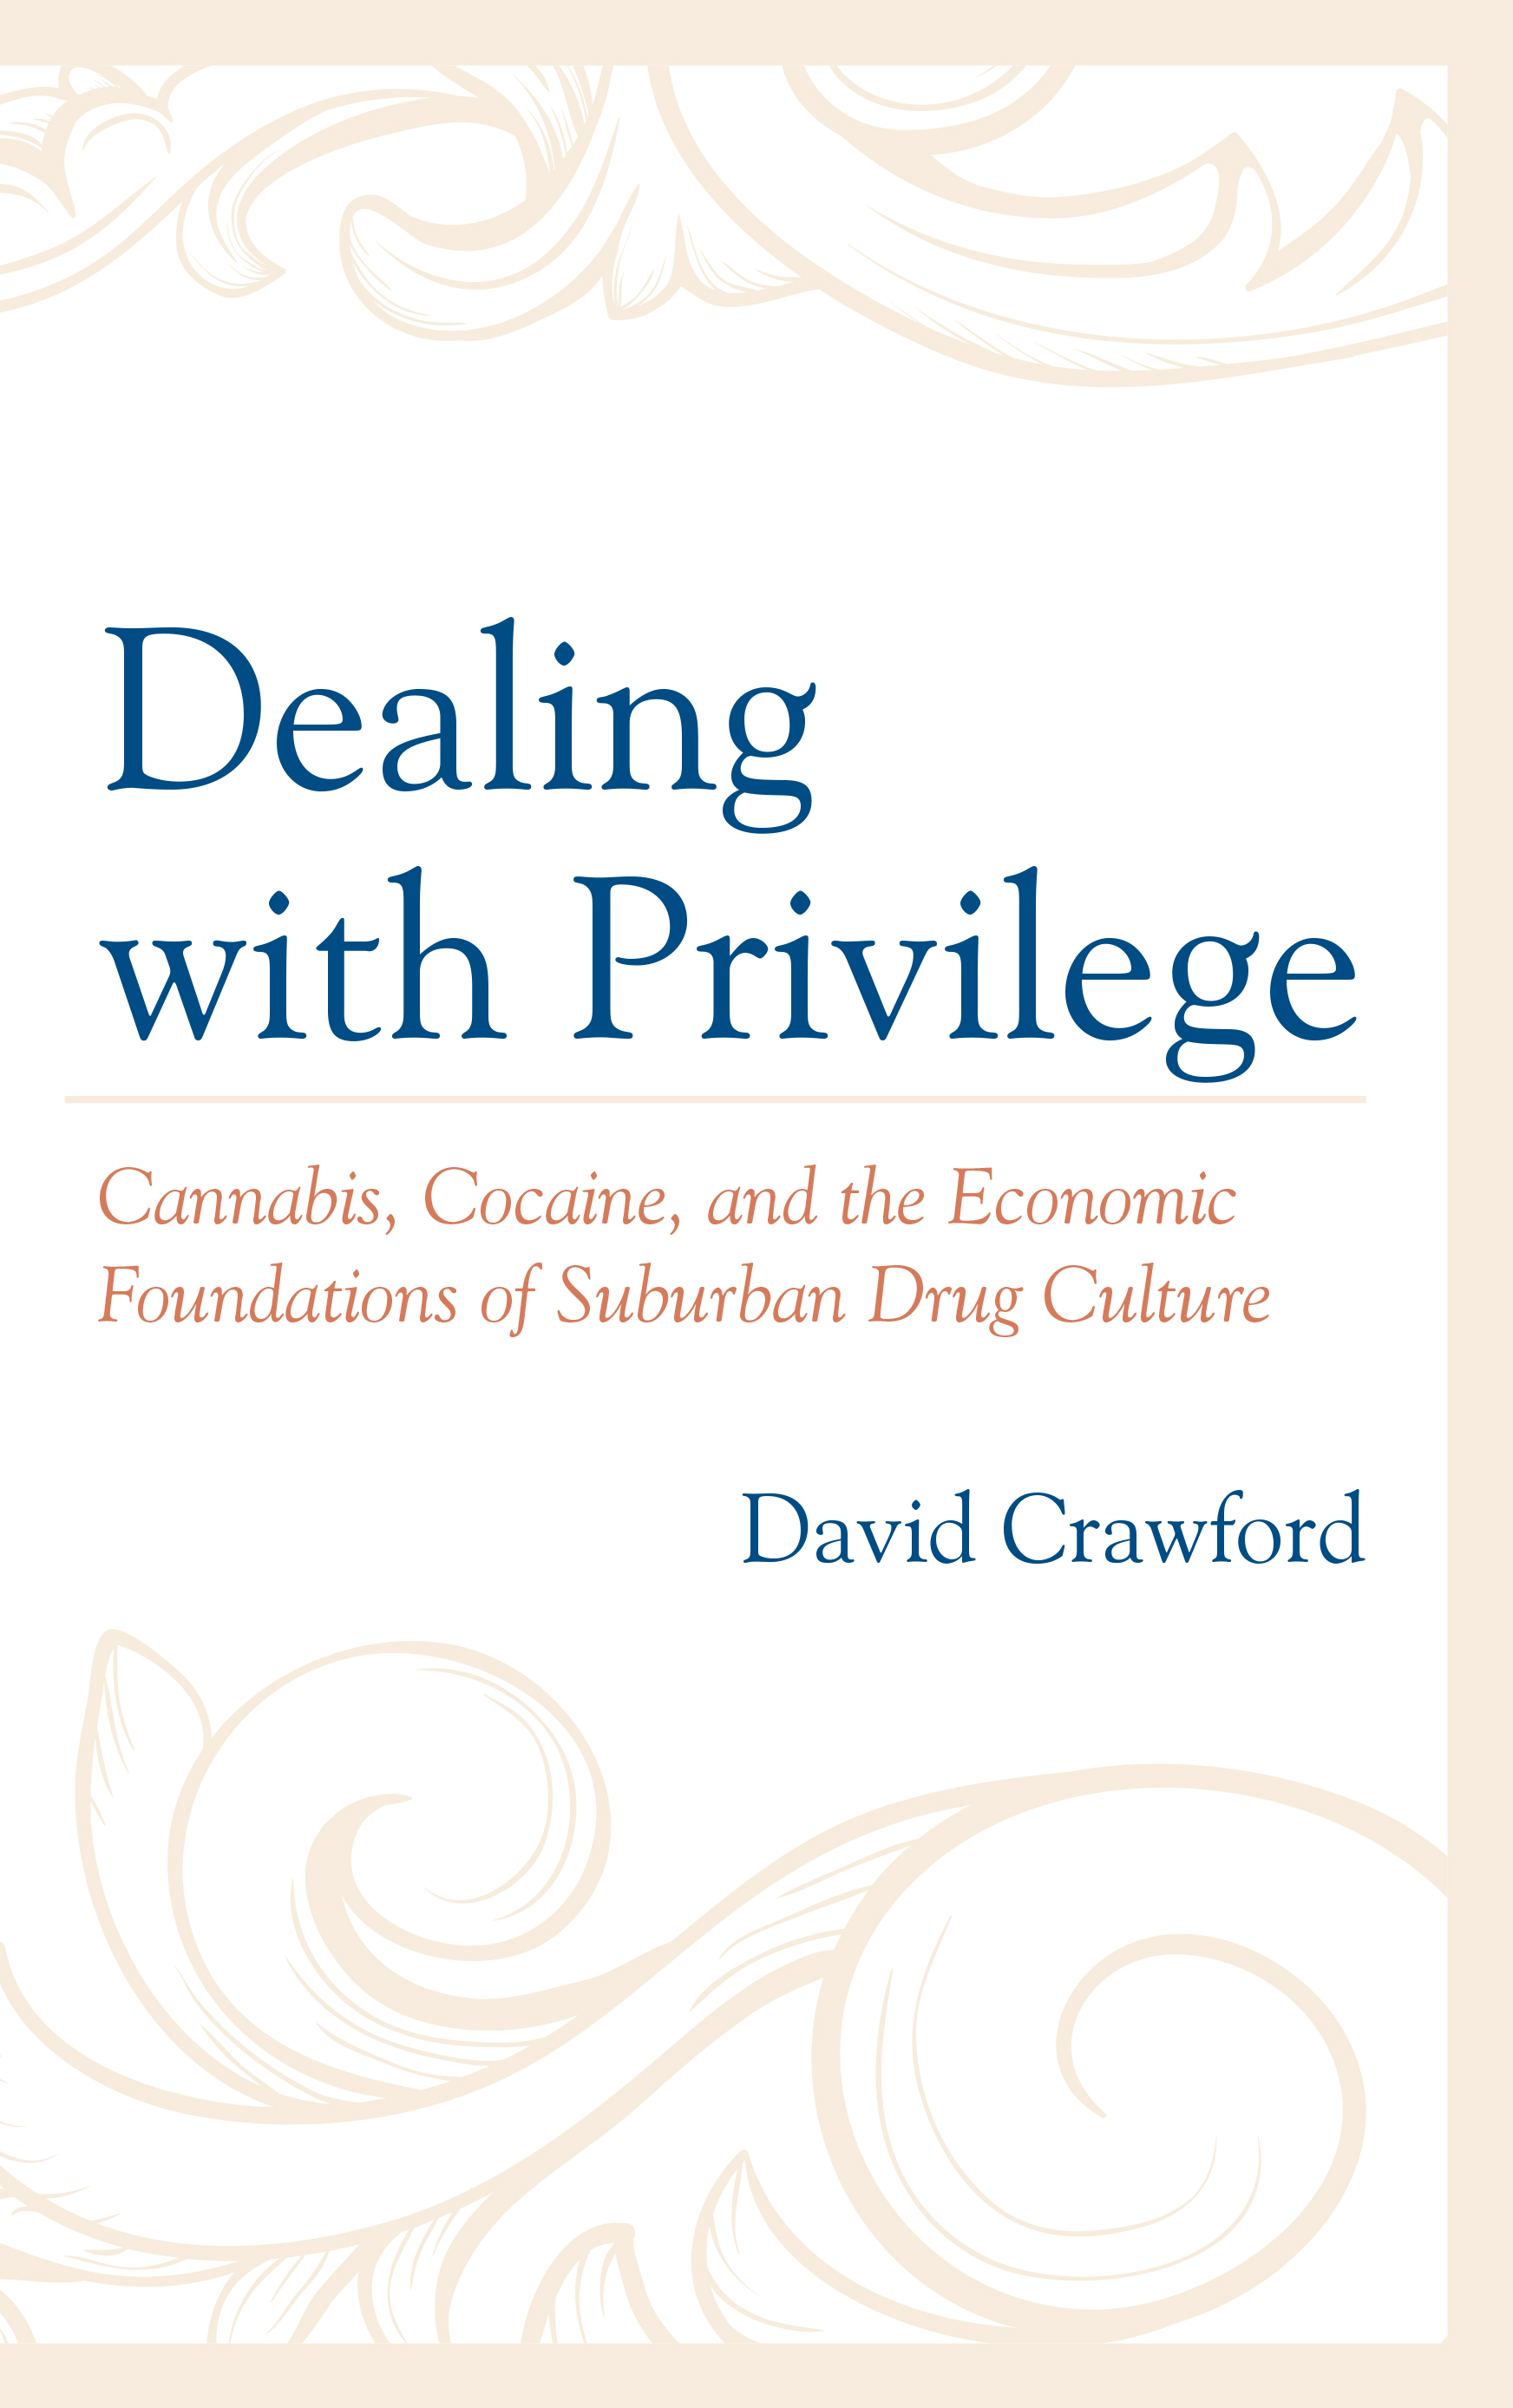 Dealing with Privilege